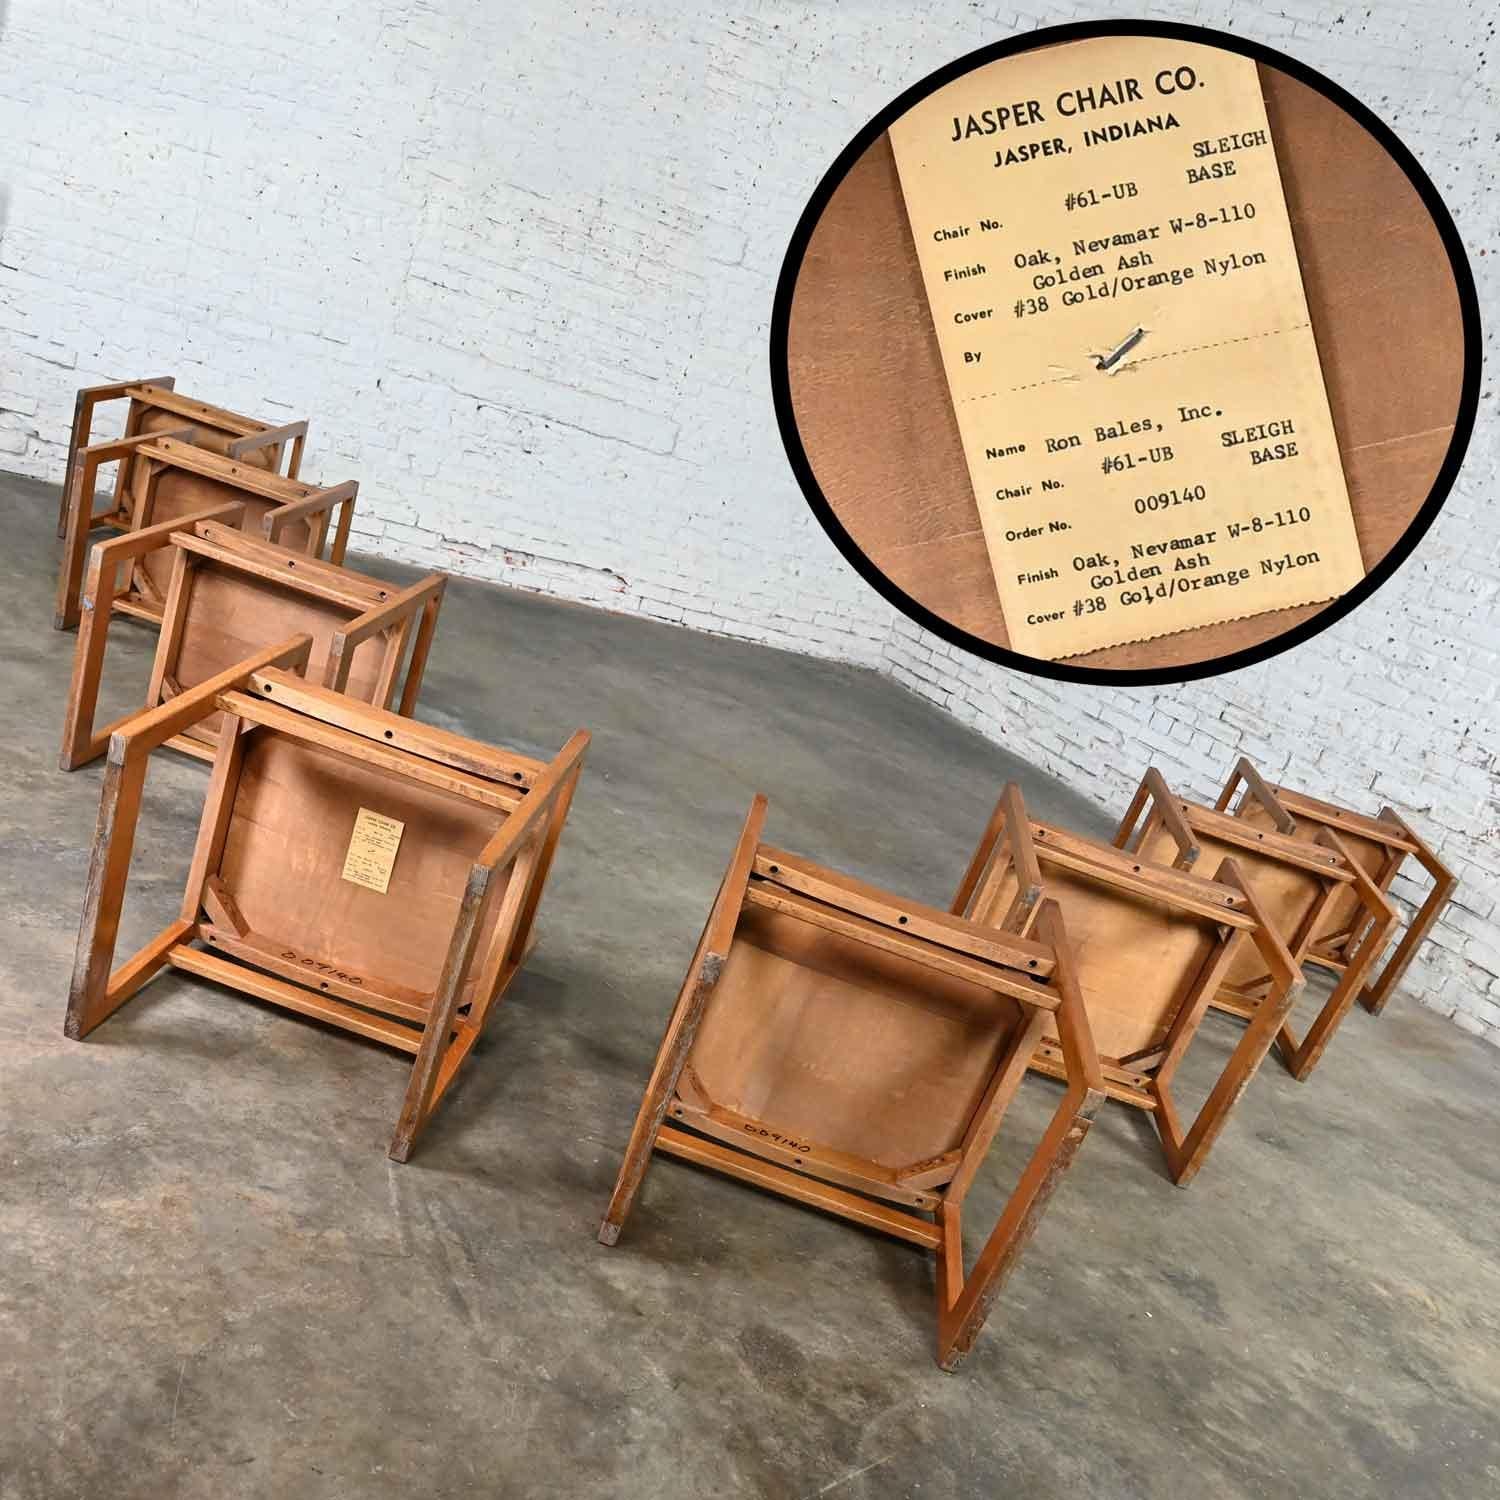 1970s Modern Dining Chairs Jasper Chair Co Orange Tweed Bentwood Seats Set of 8 For Sale 4